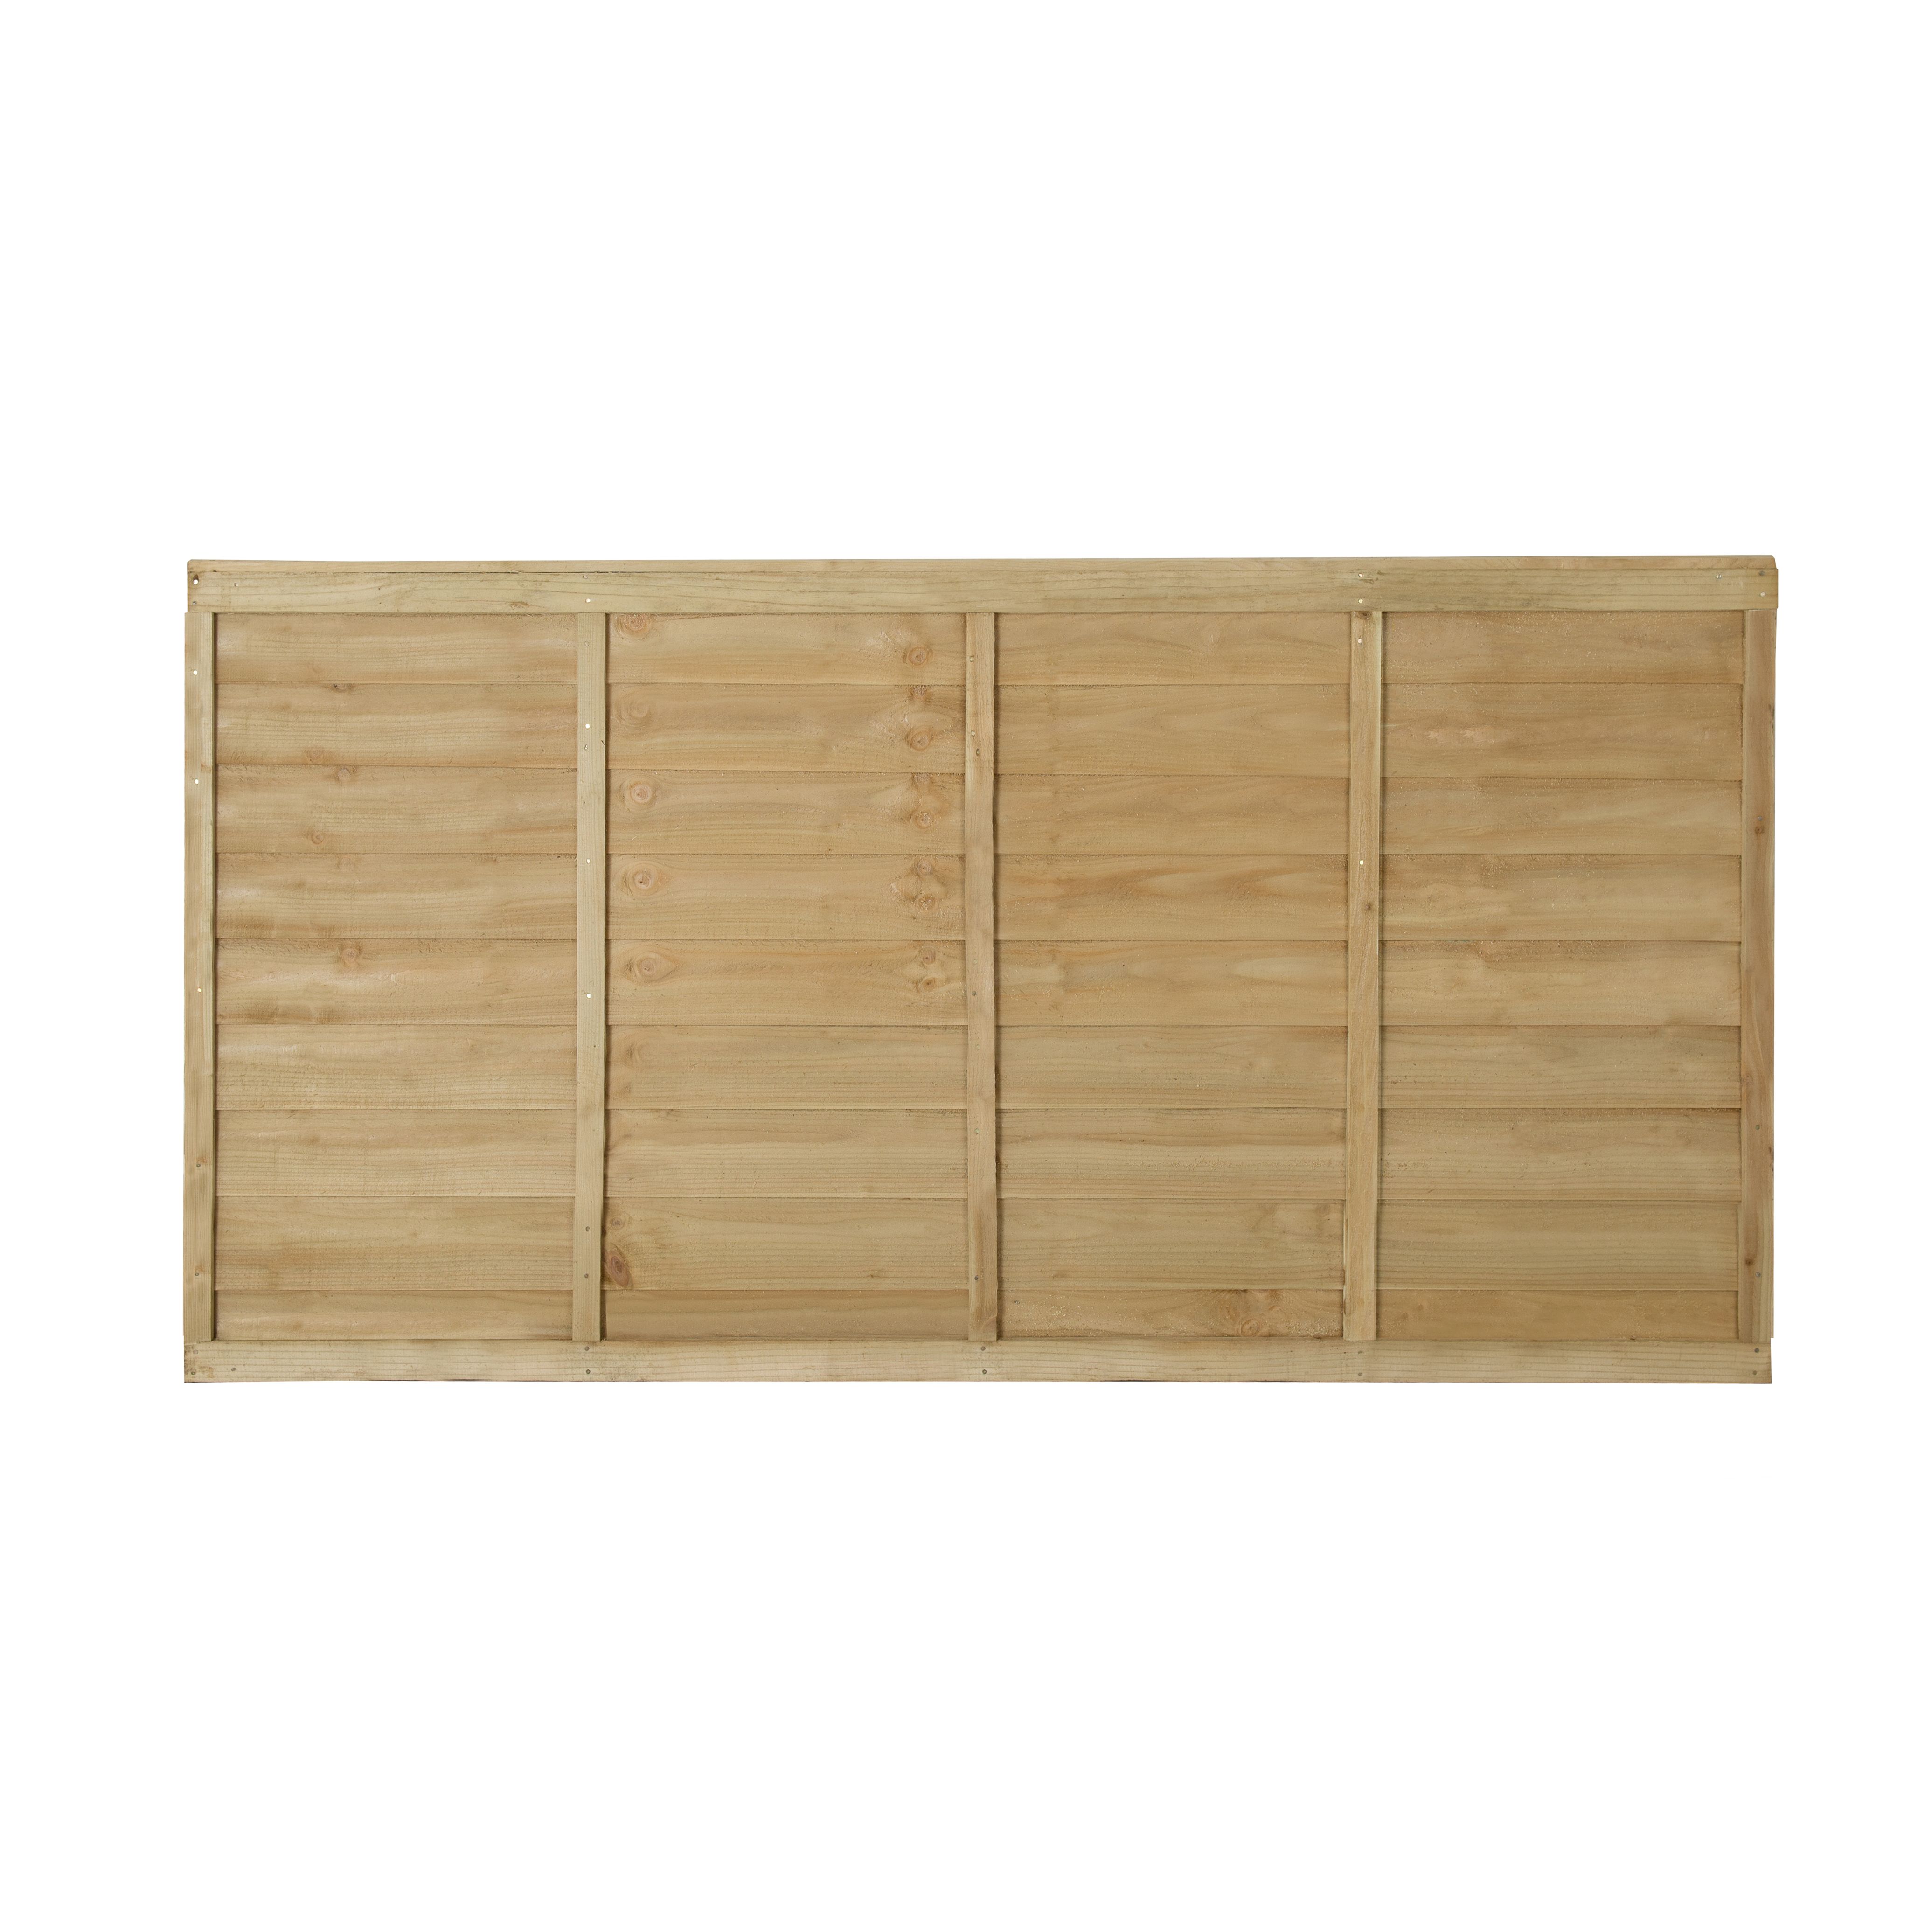 Premier Lap Pressure treated 3ft Wooden Fence panel (W)1.83m (H)0.91m, Pack of 5